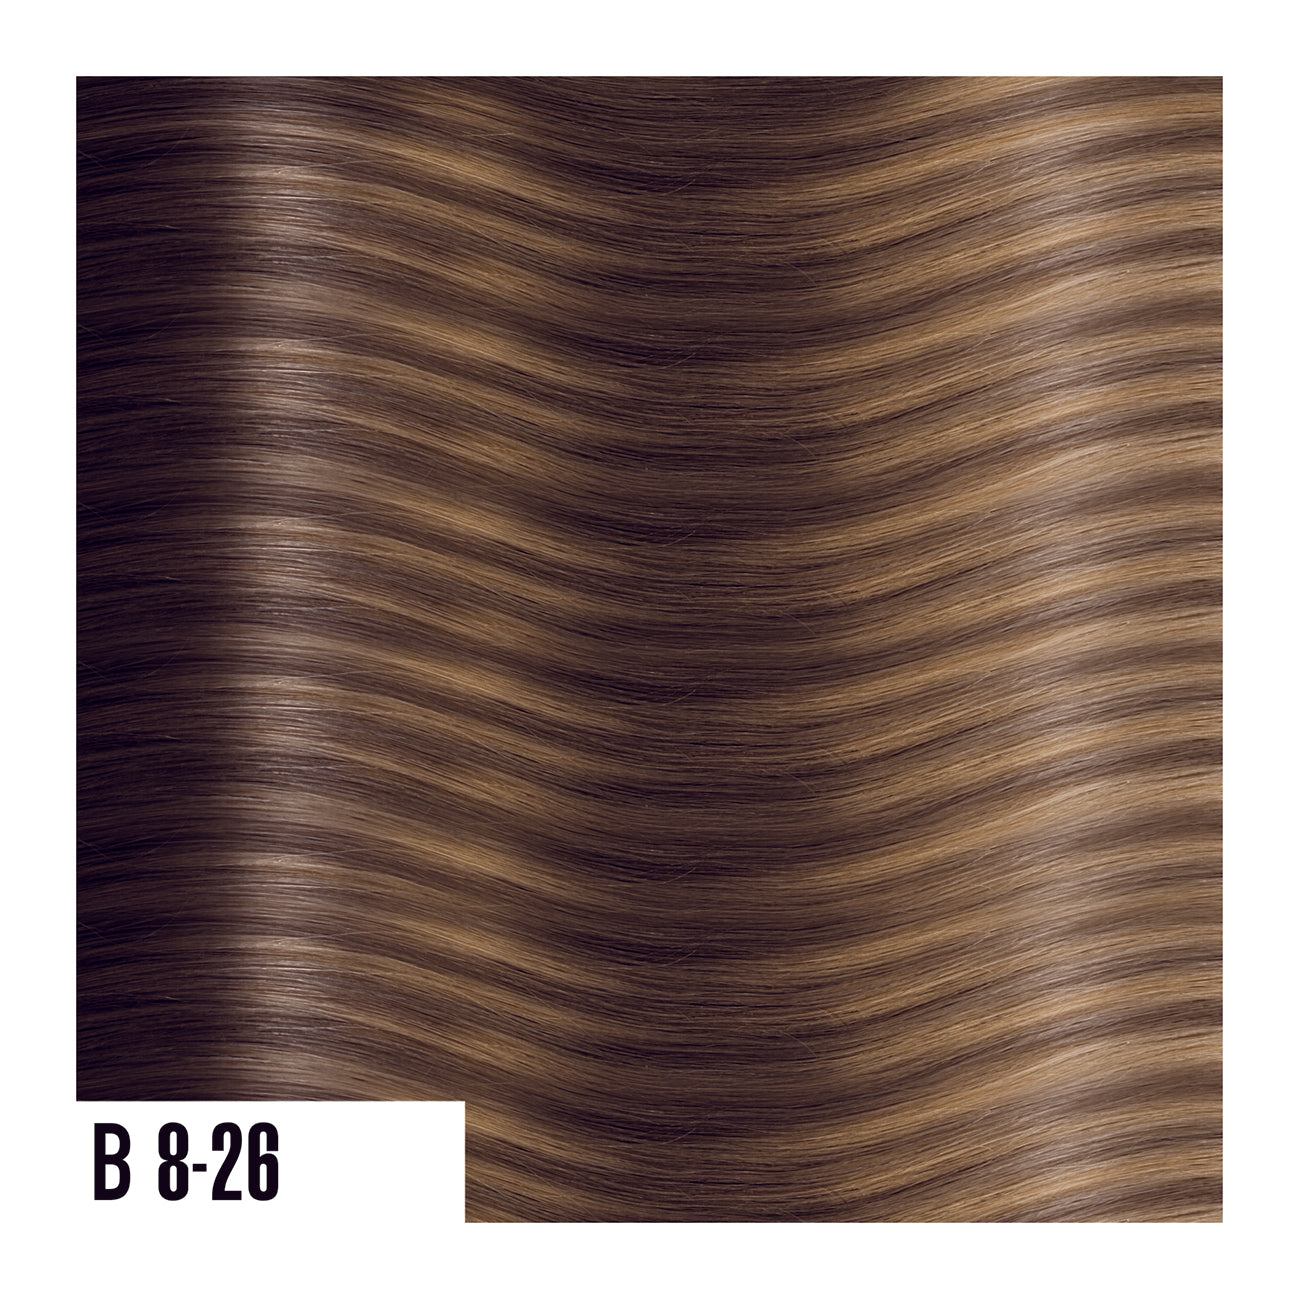 Keratin Extensions Blend of golden brown with medium brown - Balayage colors are a perfect combination of natural colored roots that blends into highlighted ends.